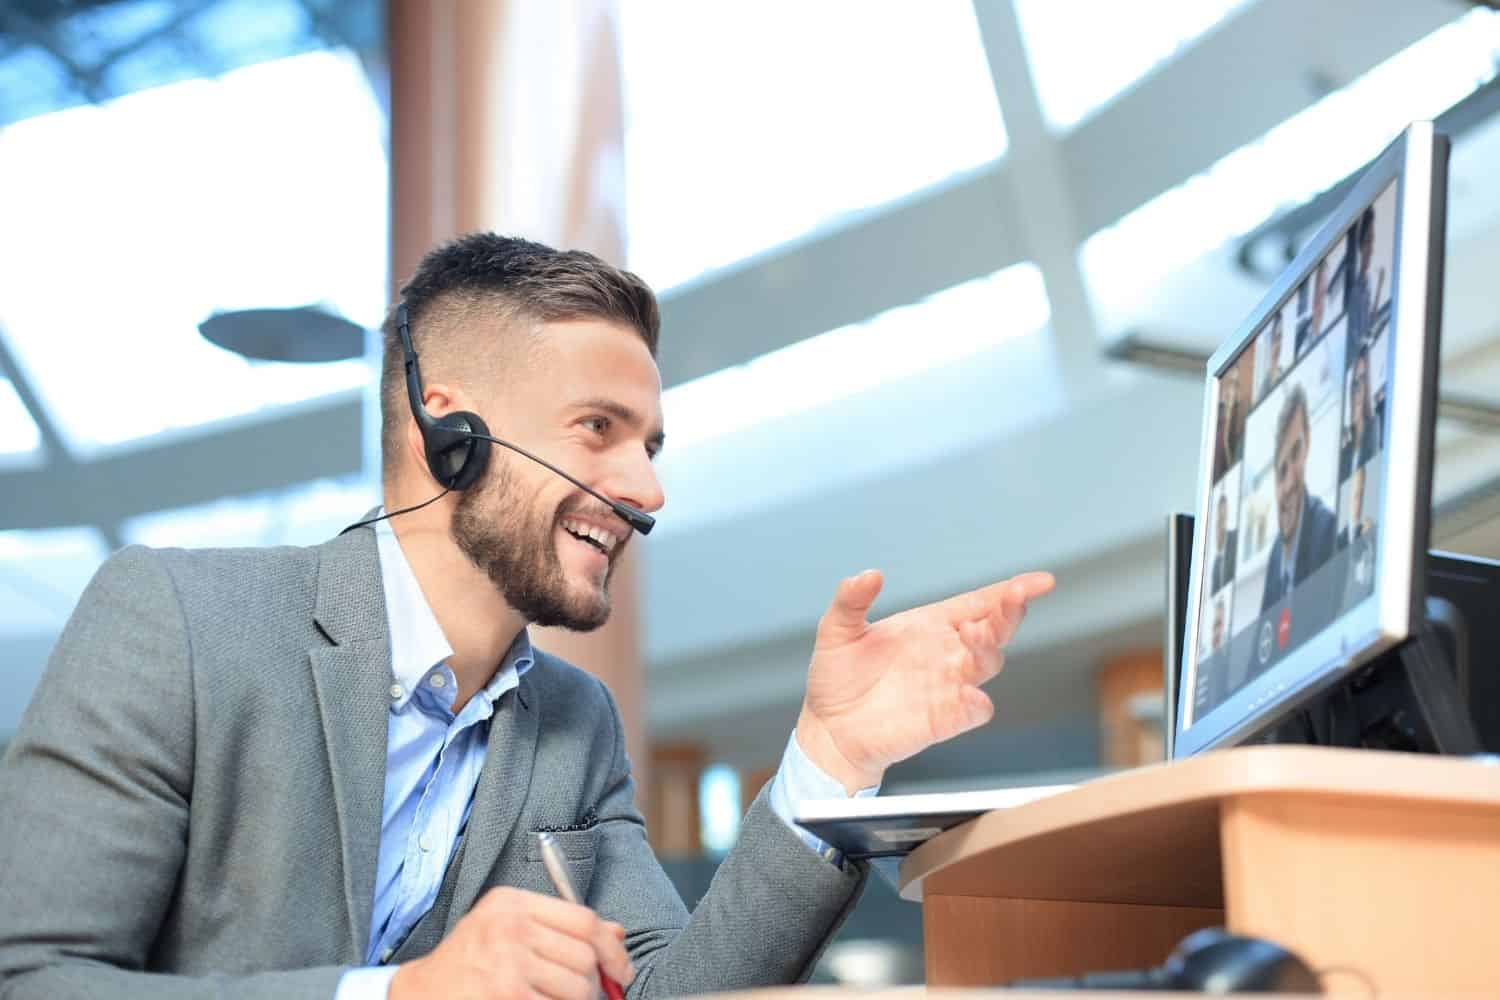 Male person perform interpreting and translation services during video conference